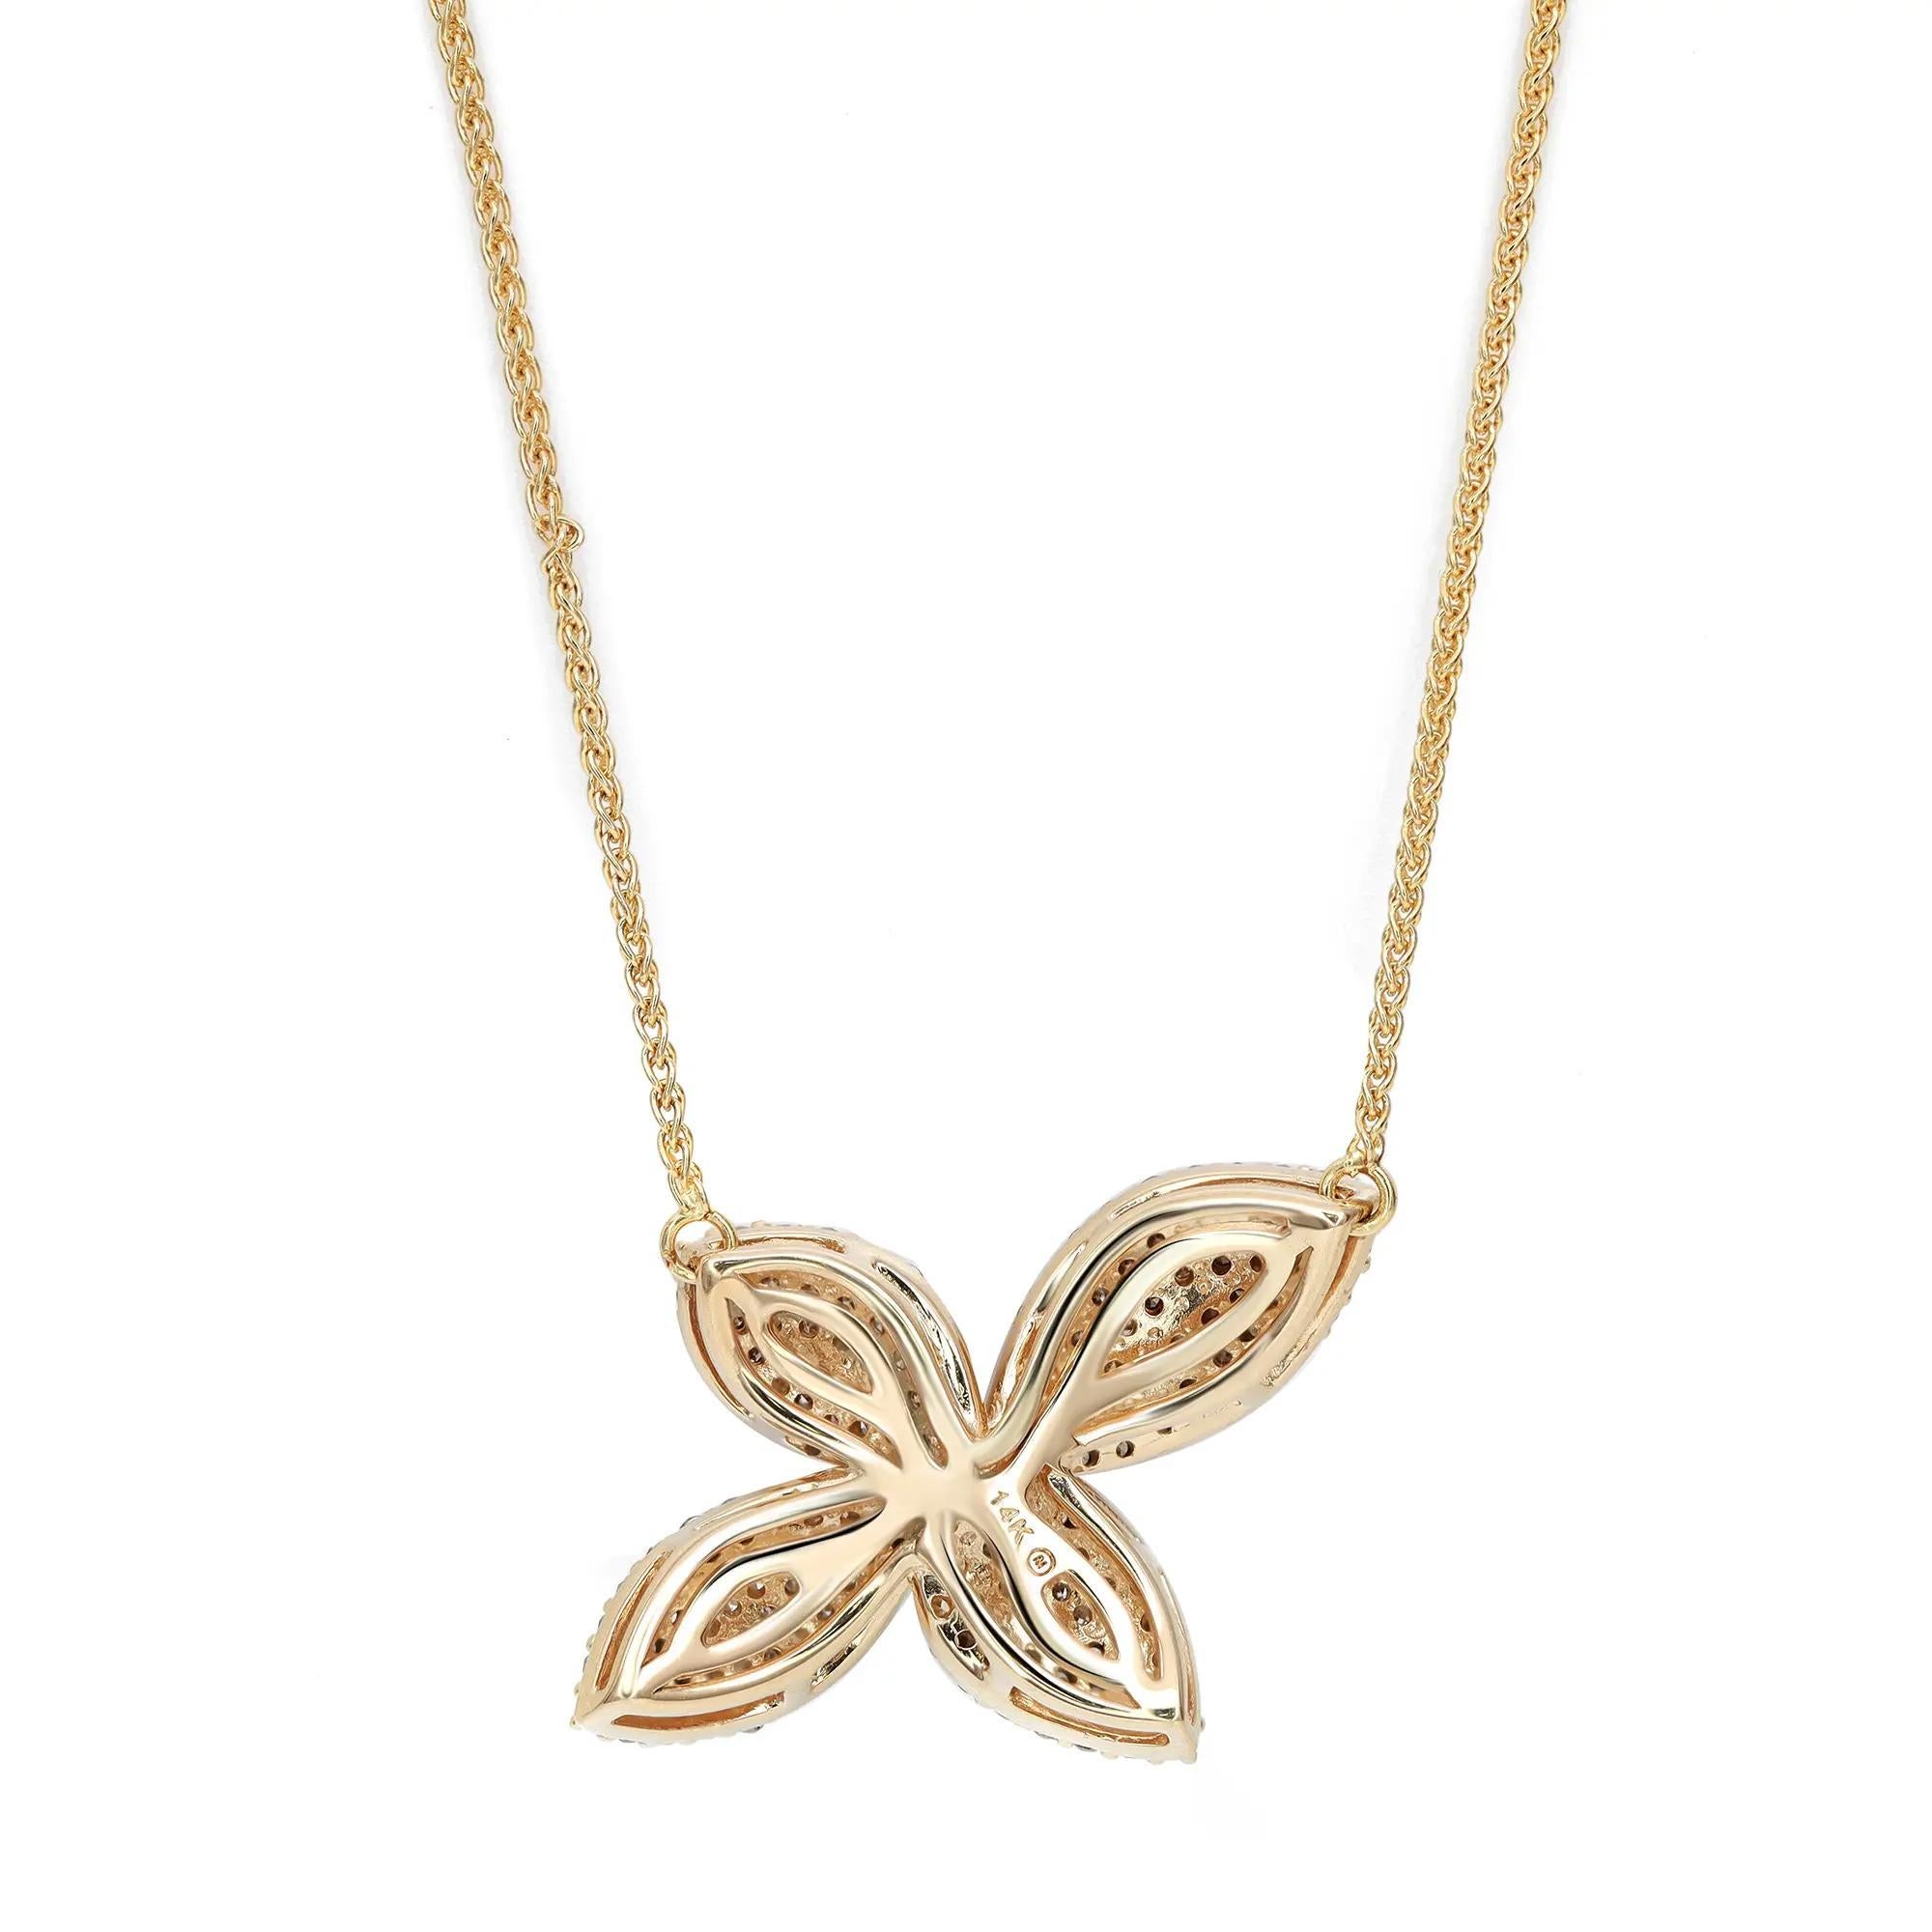 Modern Pave Diamond Floral Pendant Necklace In 14K Yellow Gold 1.00Cttw For Sale